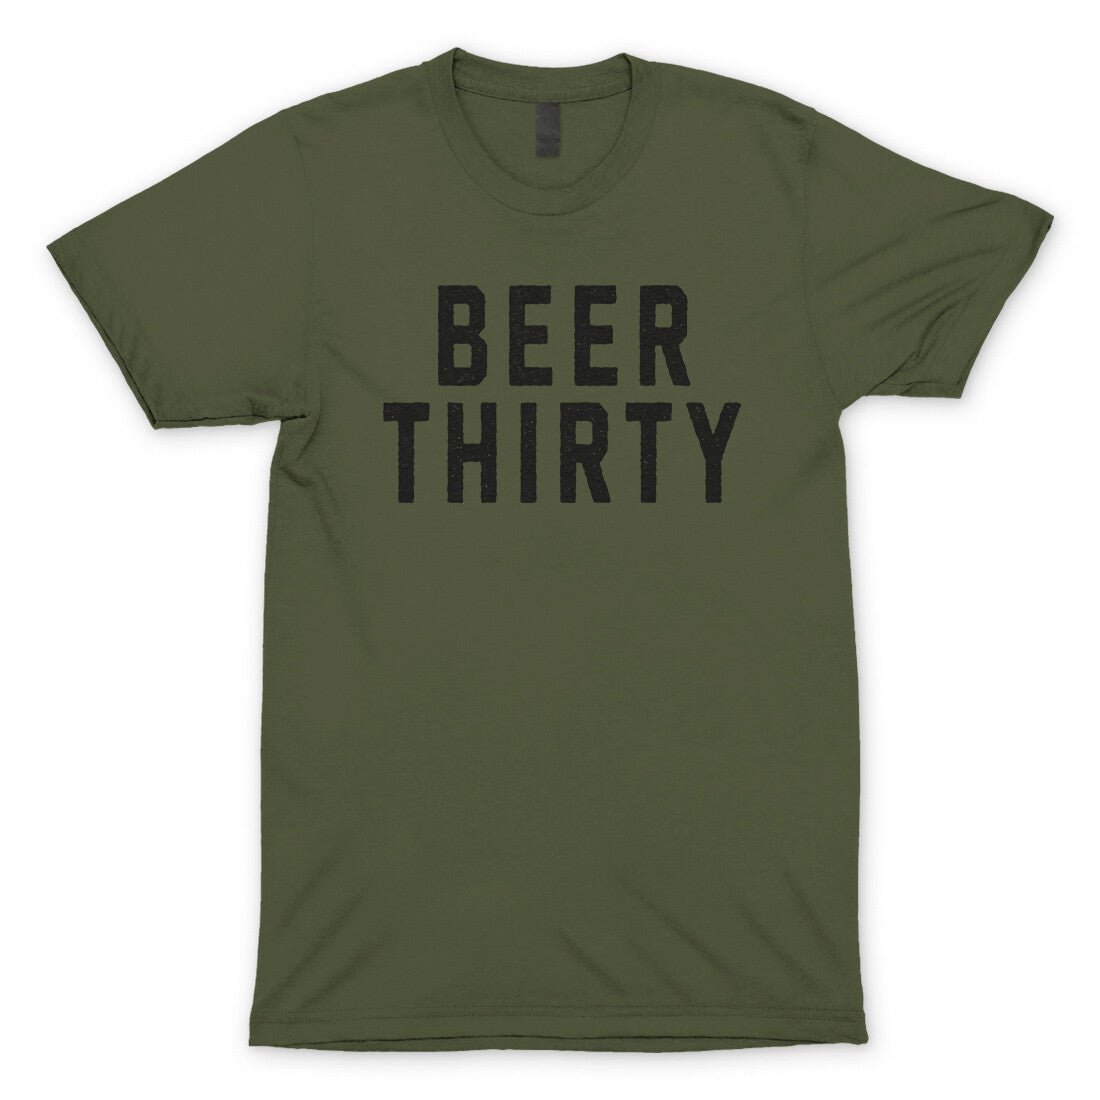 Beer Thirty in Military Green Color